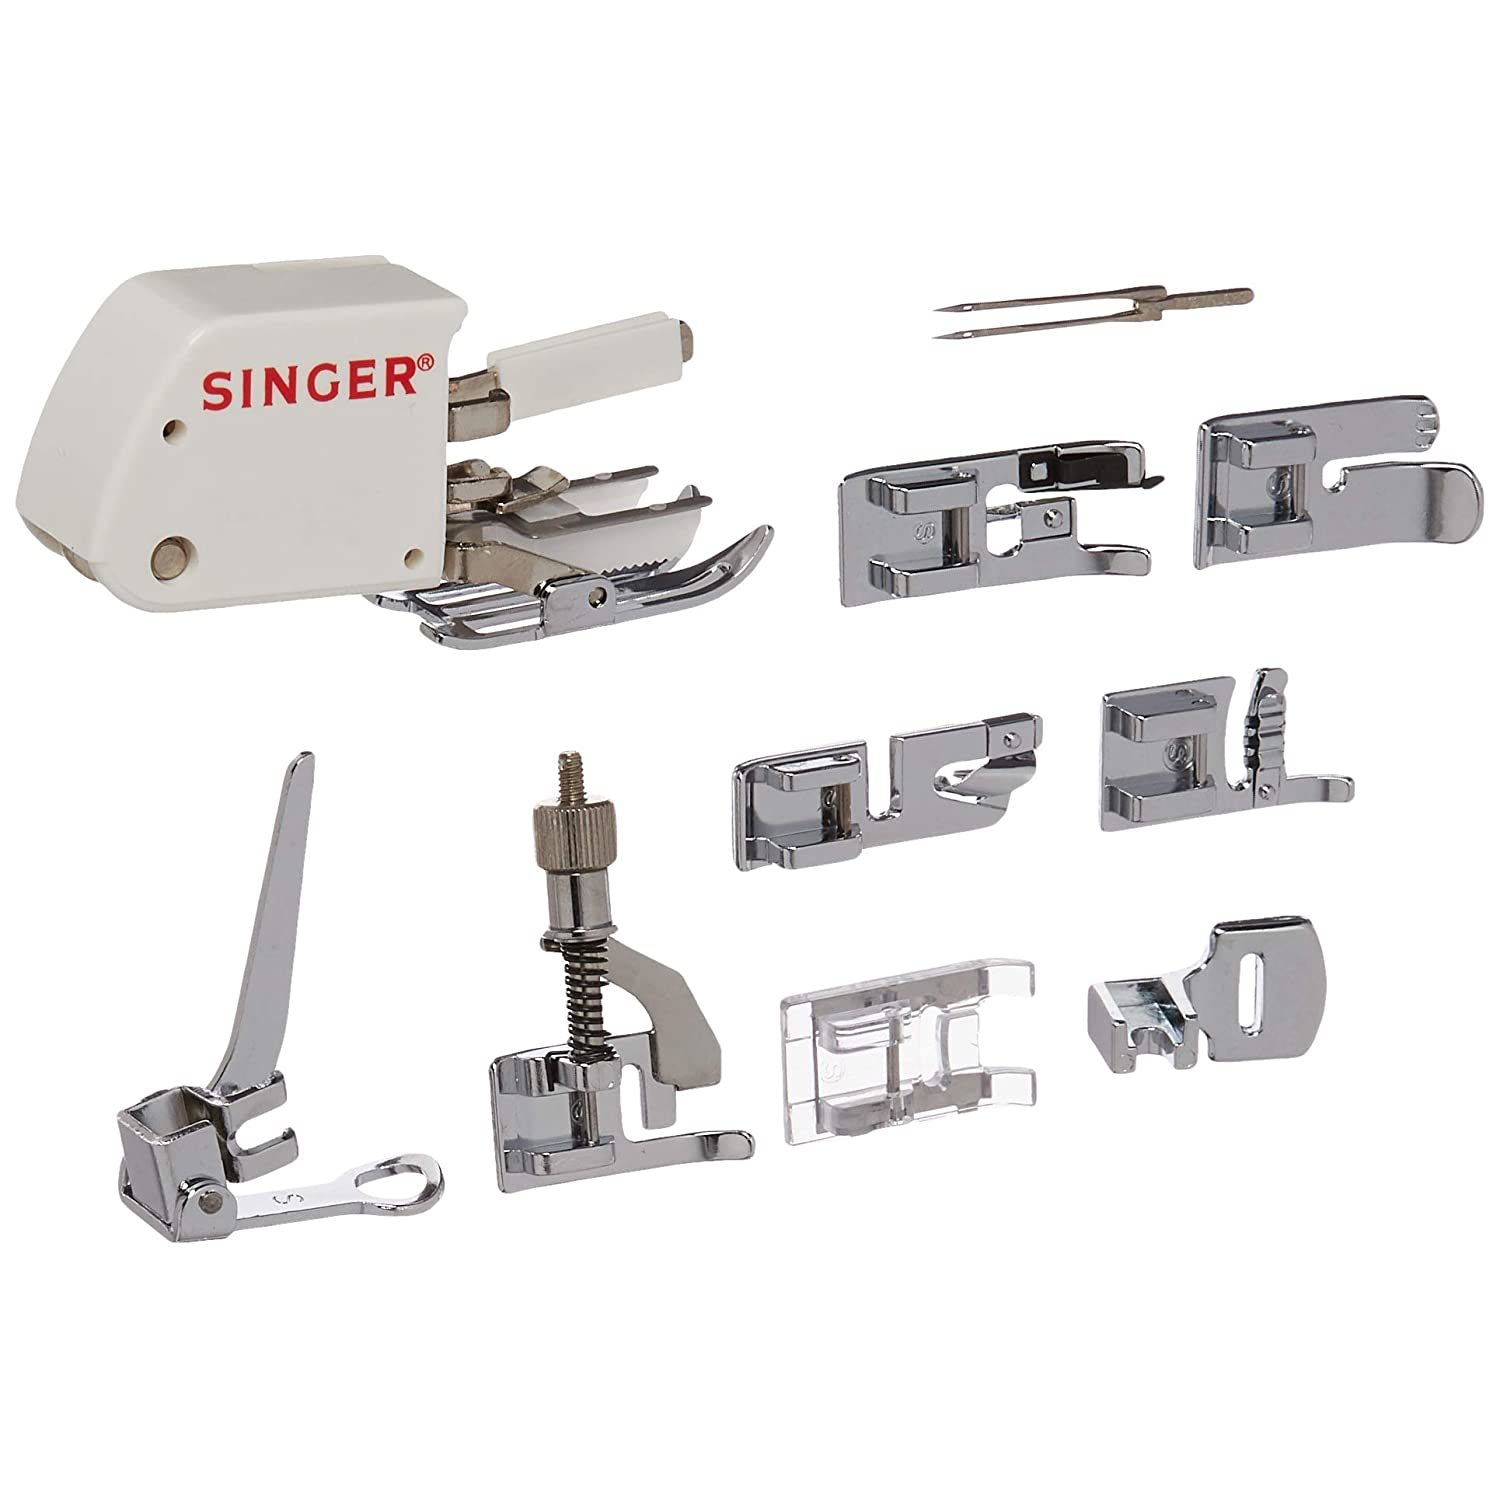 SINGER | Sewing Machine Accessory Kit, Including 9 Presser Feet, Twin Needle, an - $135.99